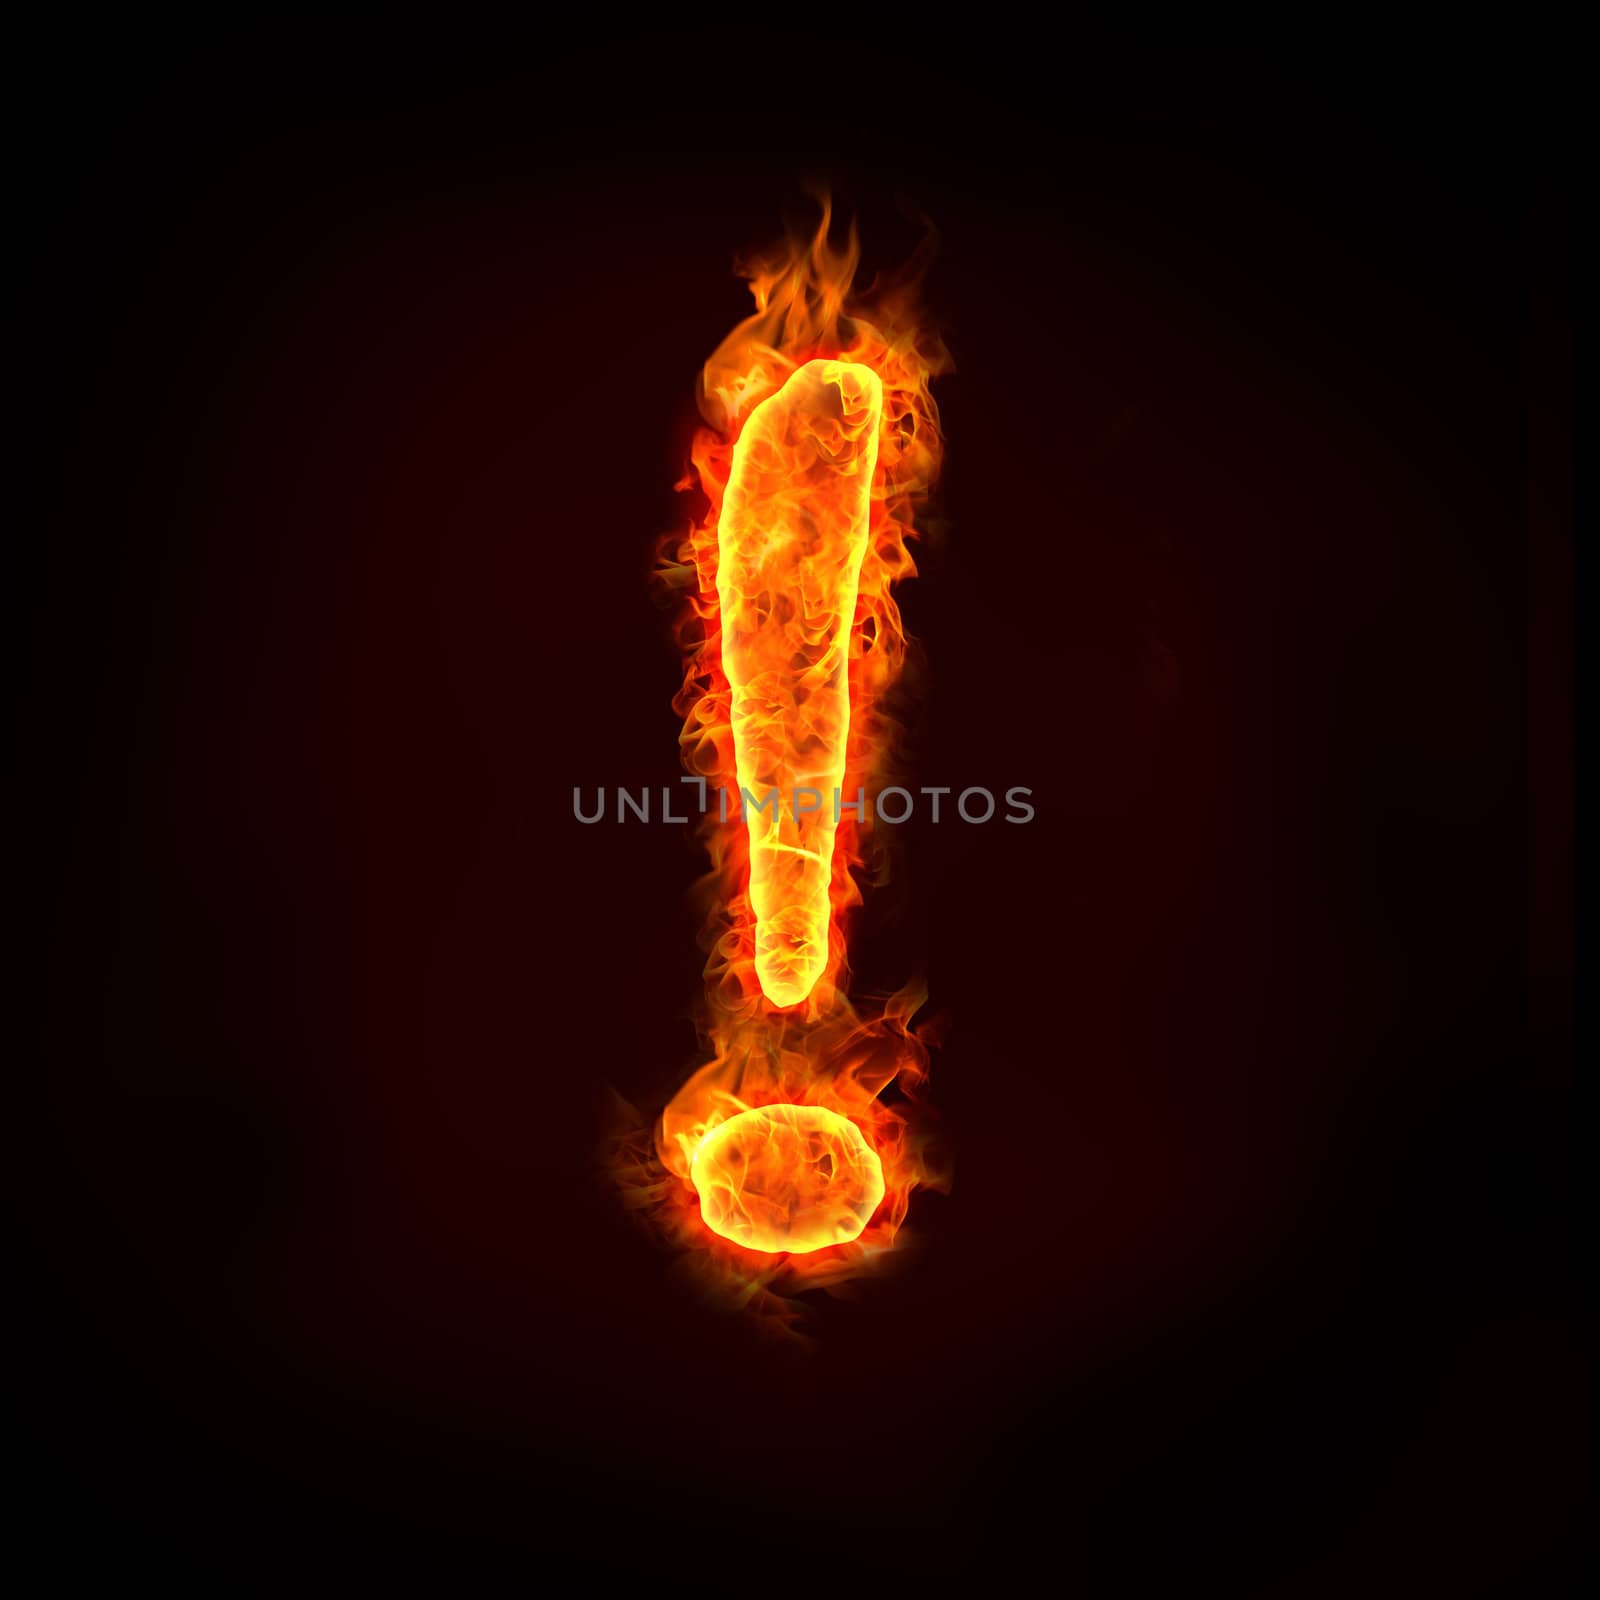 exclamation sign in flame, for attentions concept.